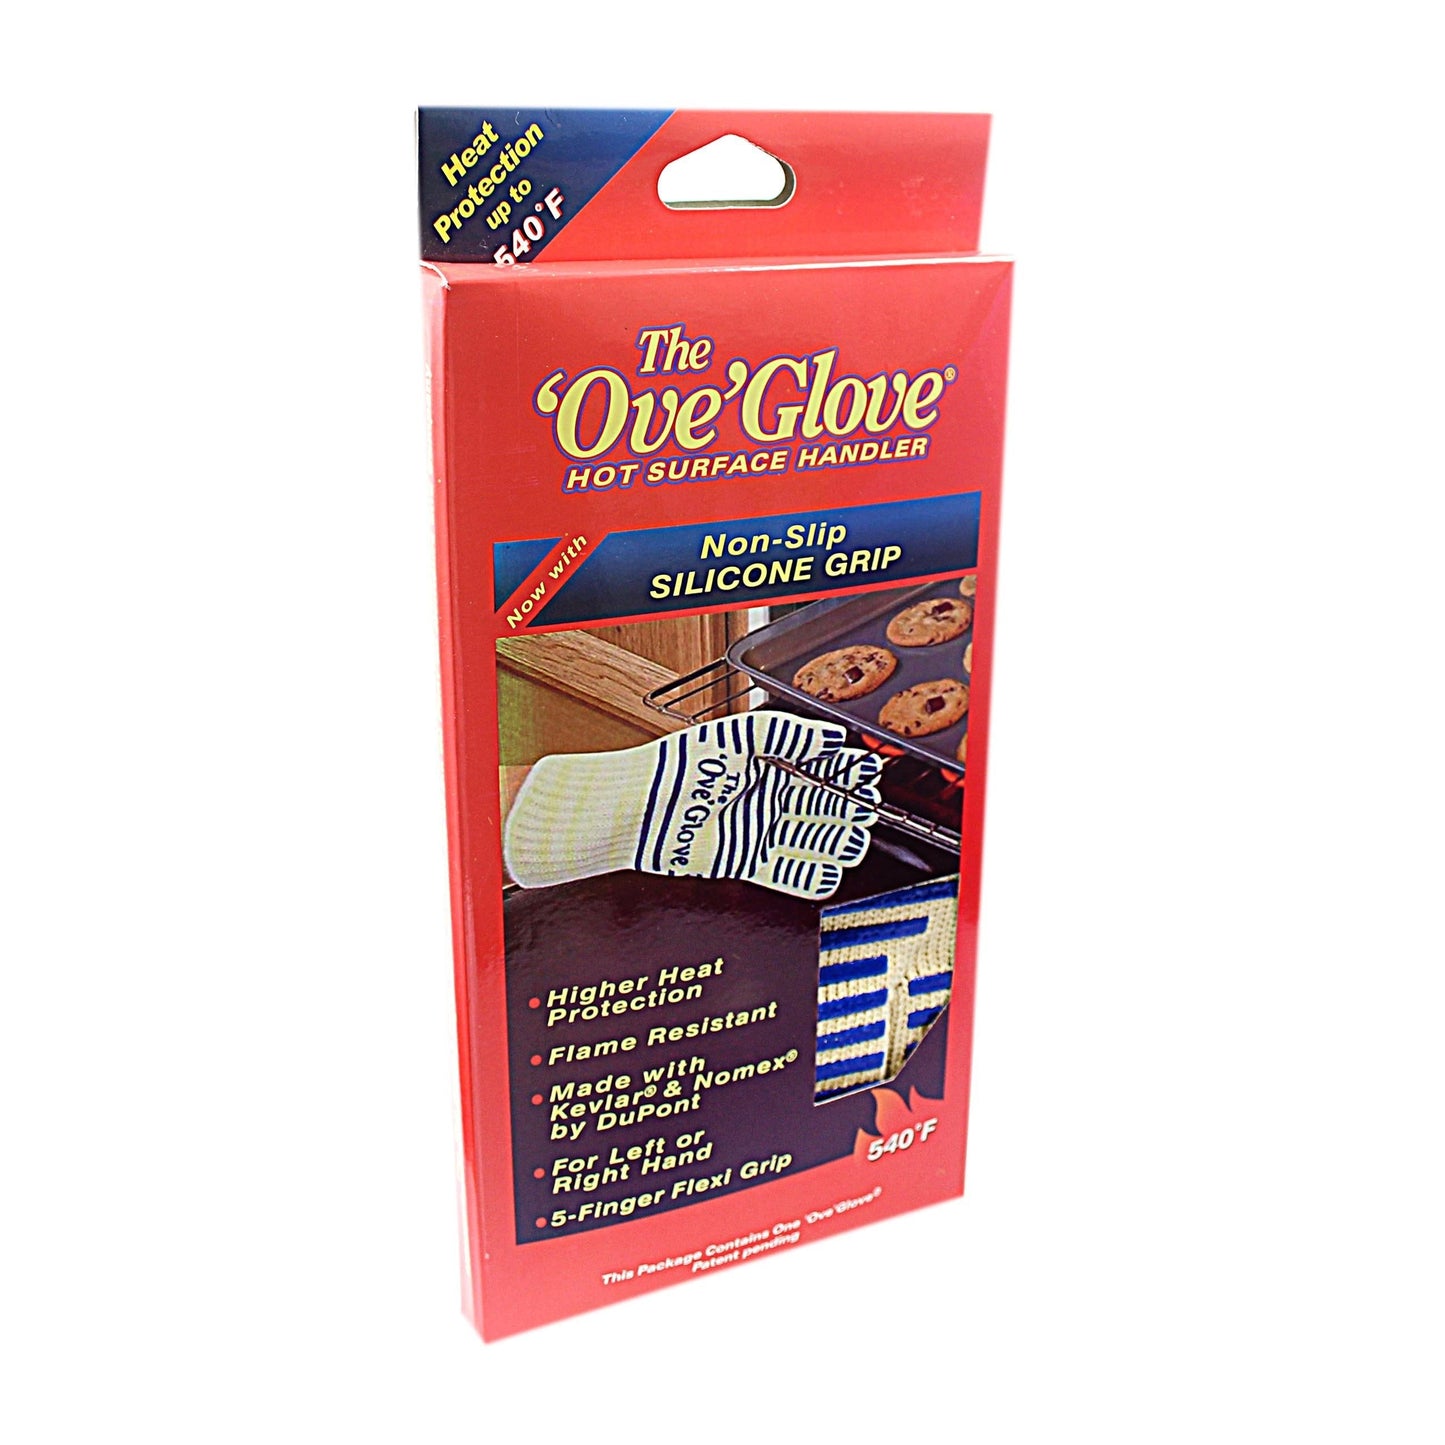 The 'Ove' Glove Heavy Duty Oven Glove Non- Slip Silicone Grip Washable 15 cm x 24 cm Large 4403 A (Parcel Rate)